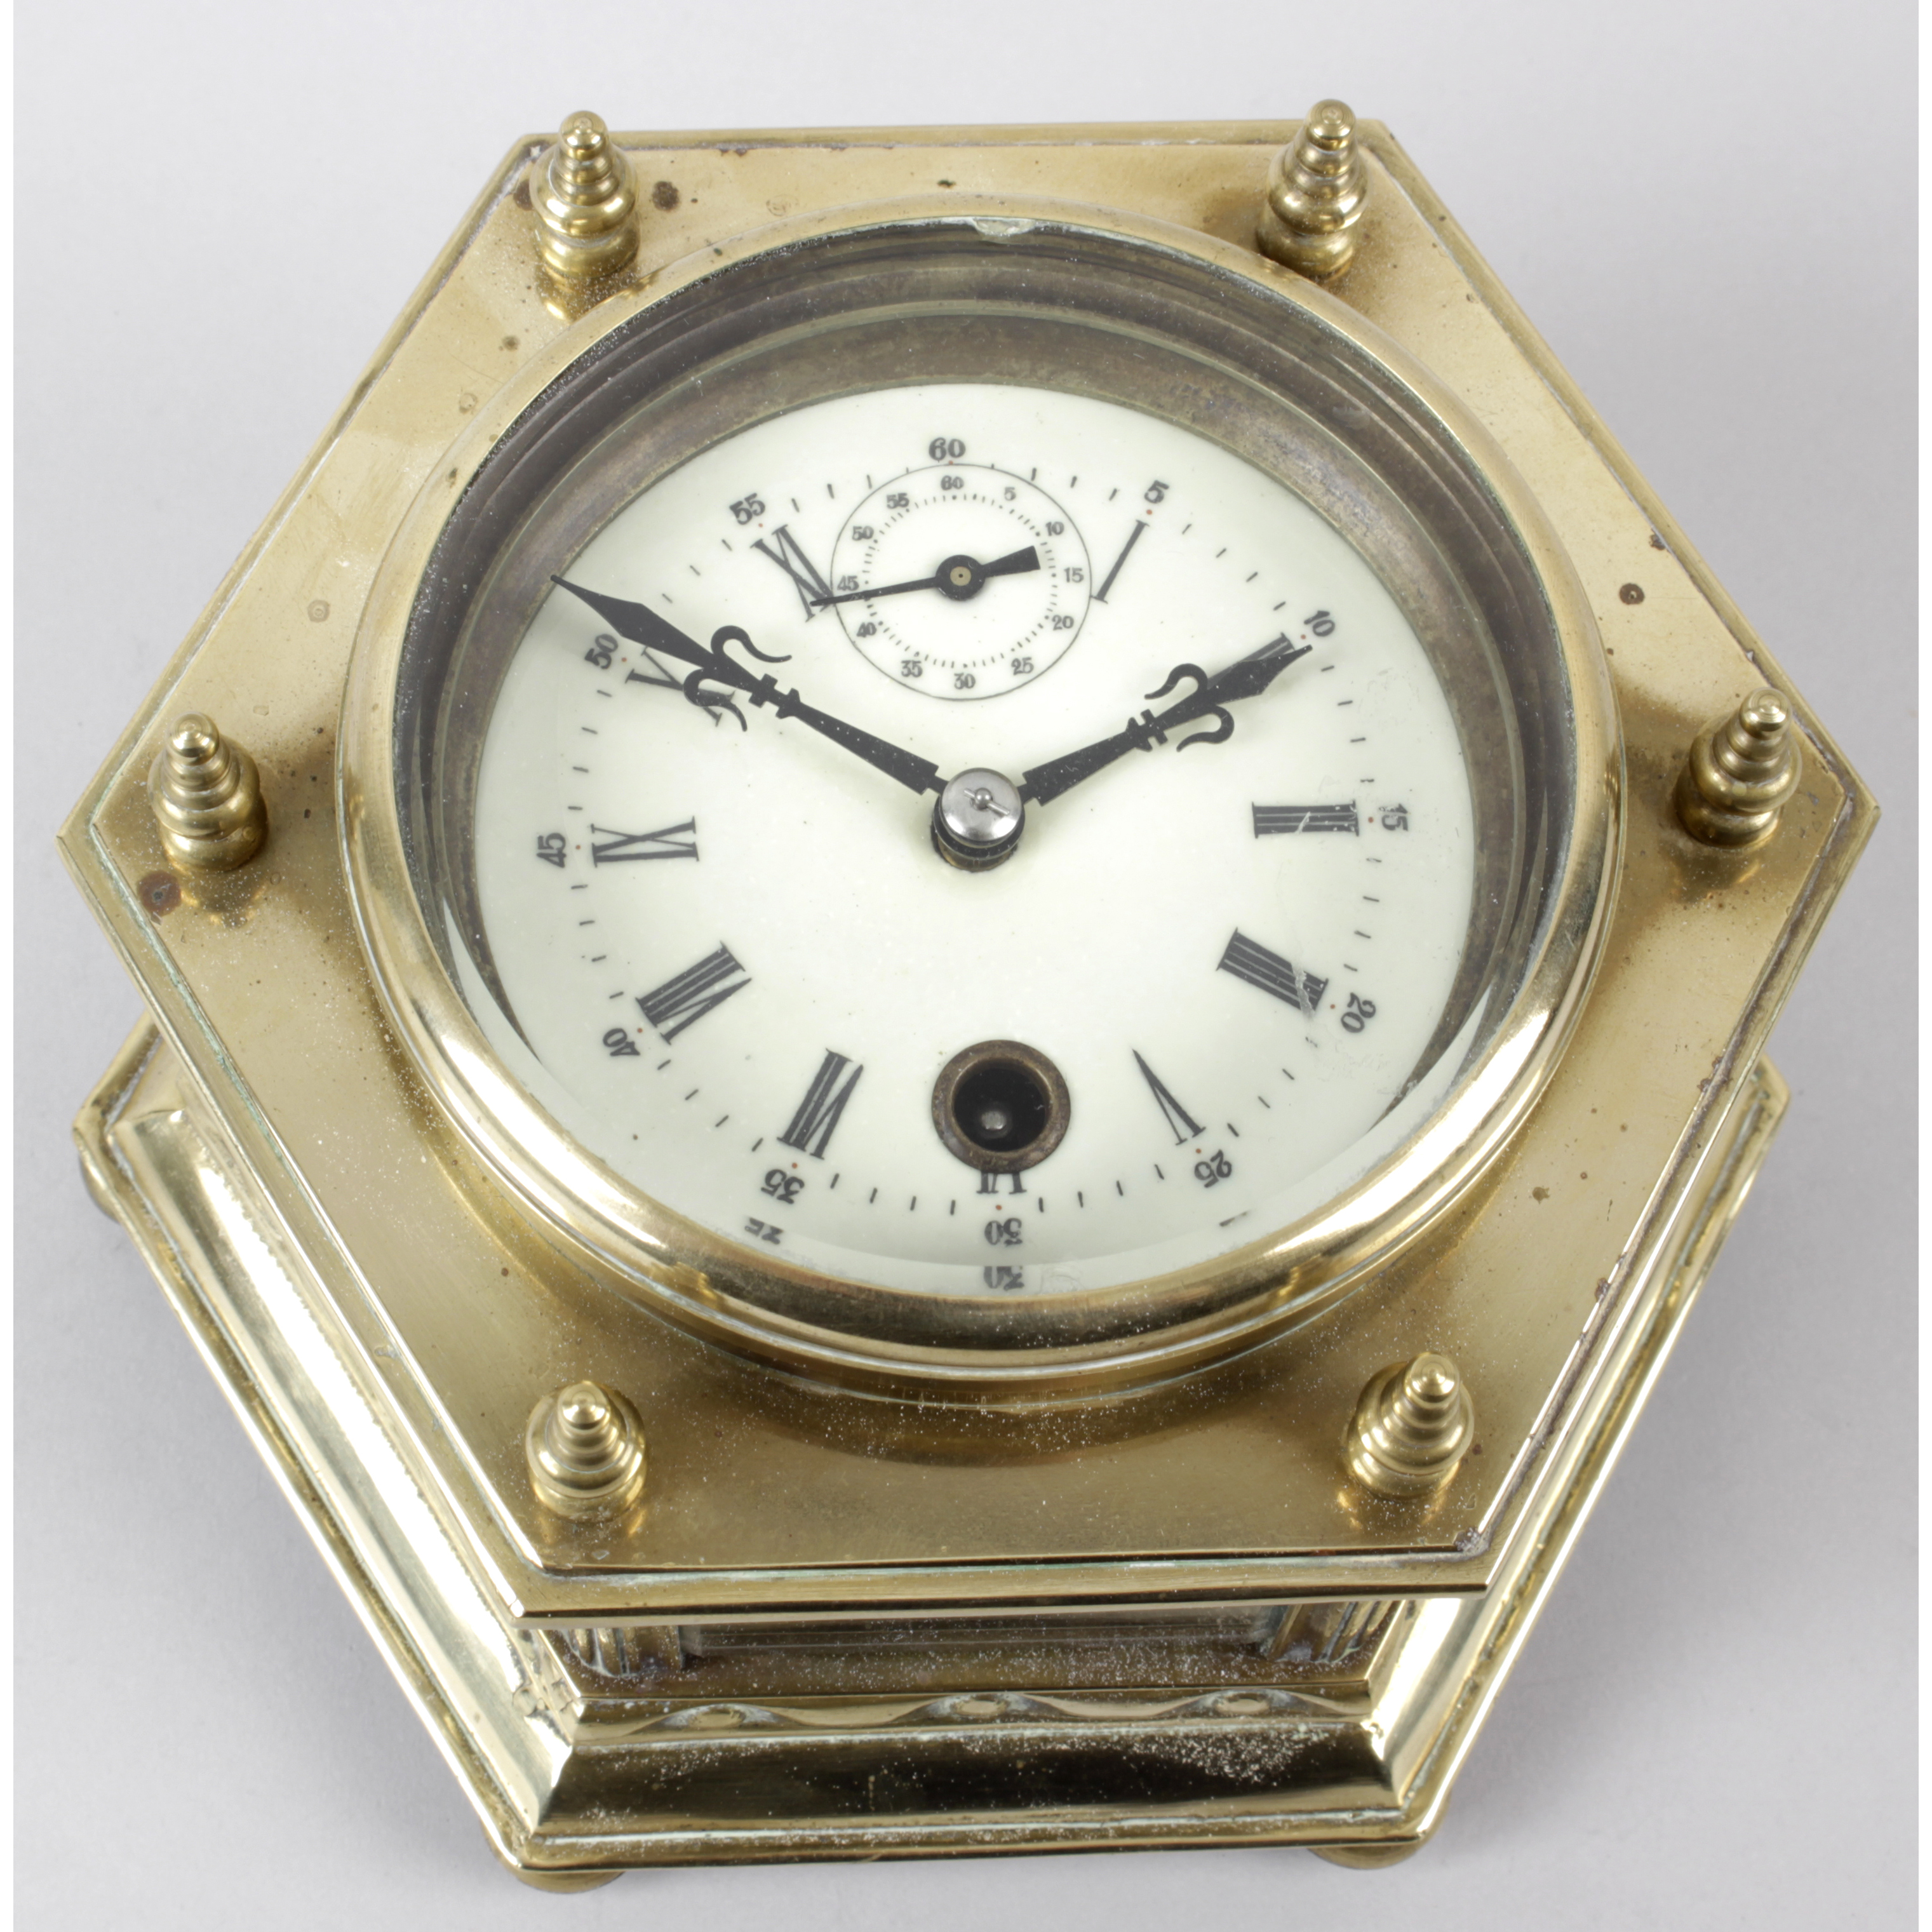 A reproduction brass cased desk clock.